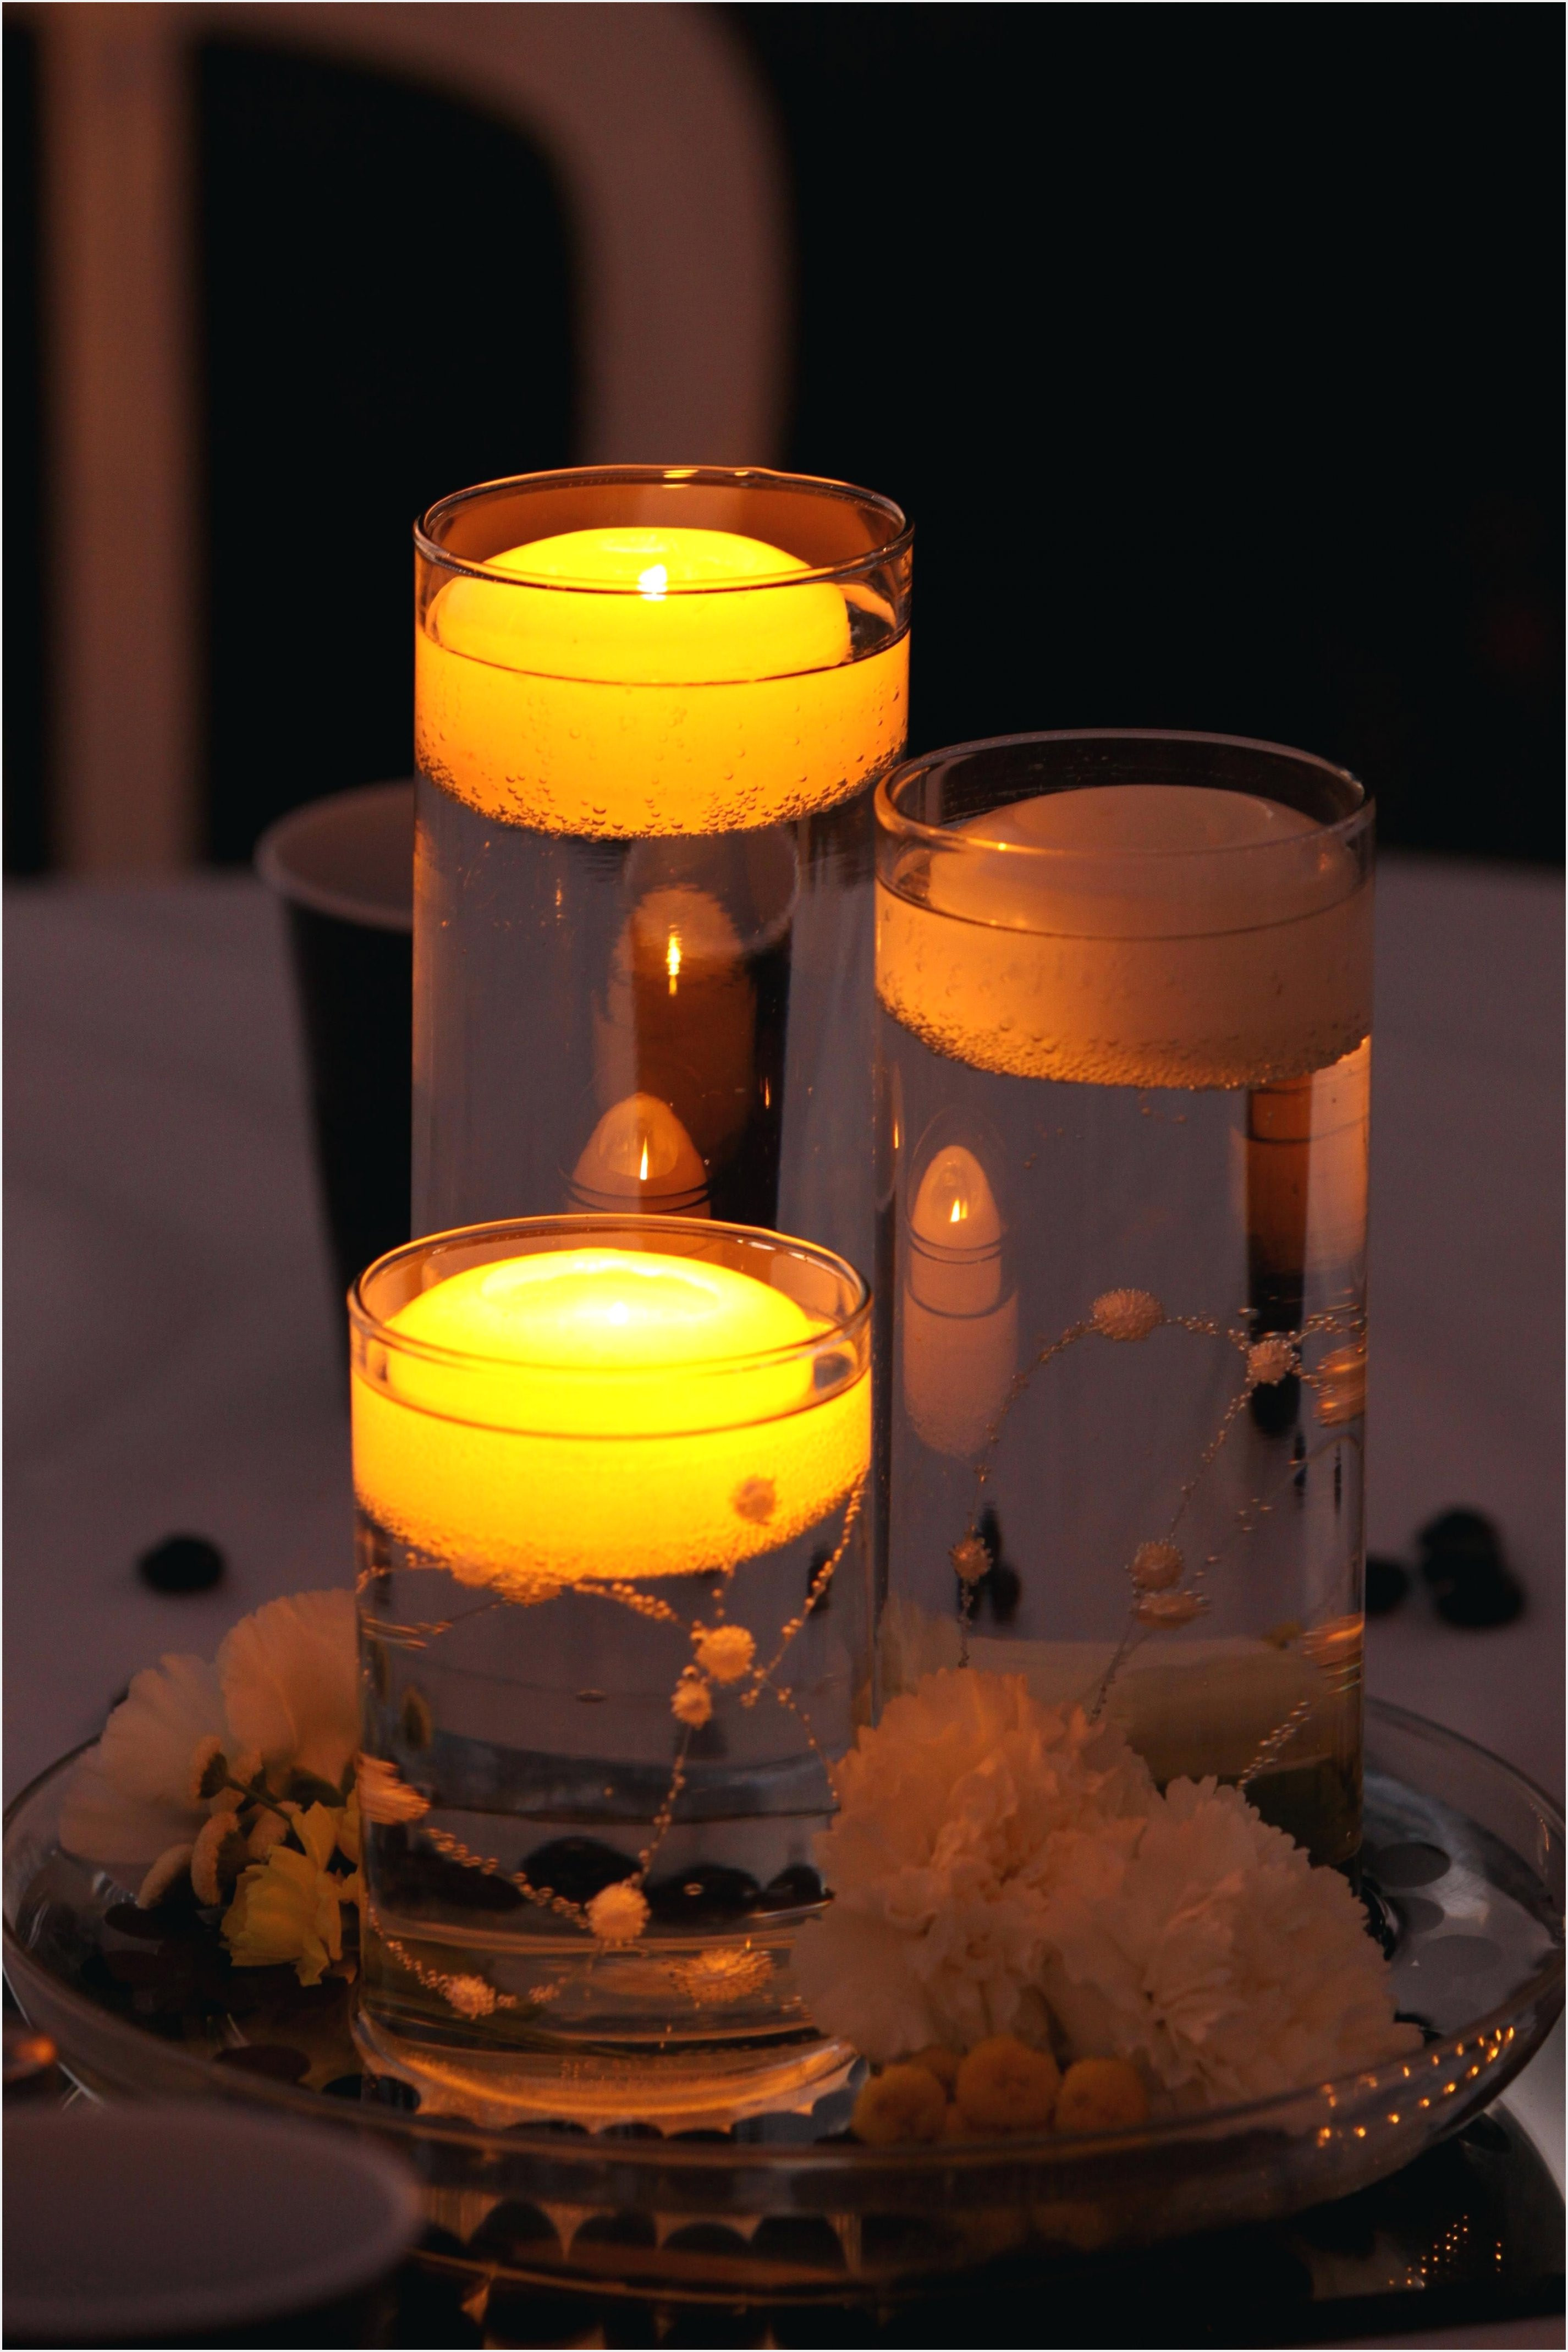 26 Stylish Floating Candle Vases Uk 2024 free download floating candle vases uk of incantevole candel holder le migliori idee per la casa 100re org intended for best 25 candle vases ideas pinterest wedding table with floating candles bulkh bulk 